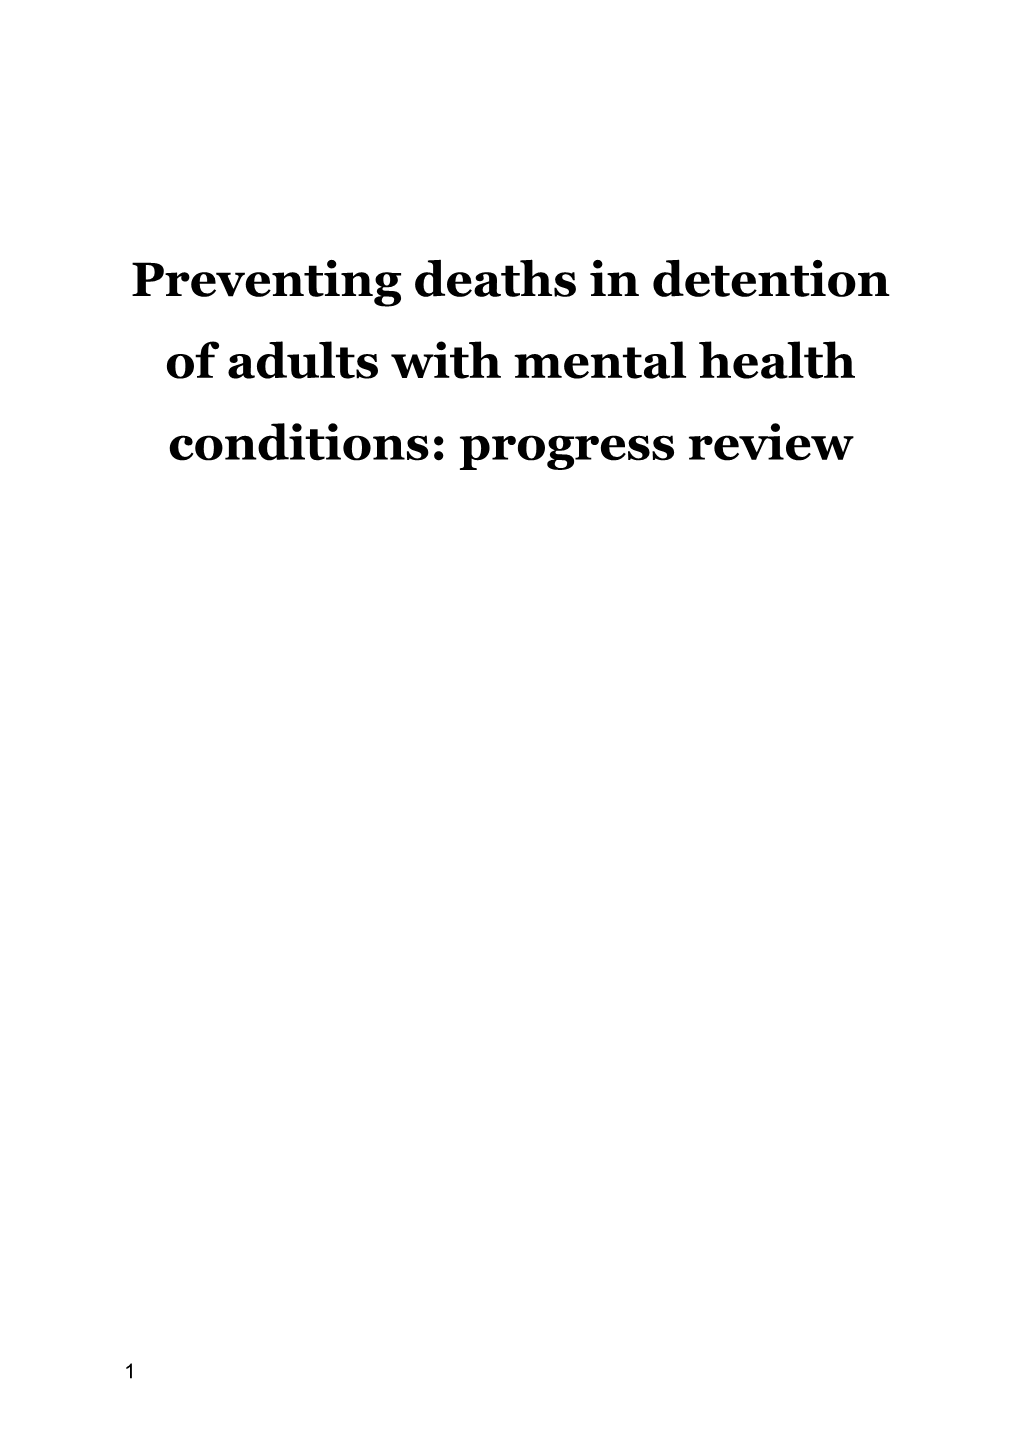 Preventing Deaths in Detention of Adults with Mental Health Conditions: Progress Review